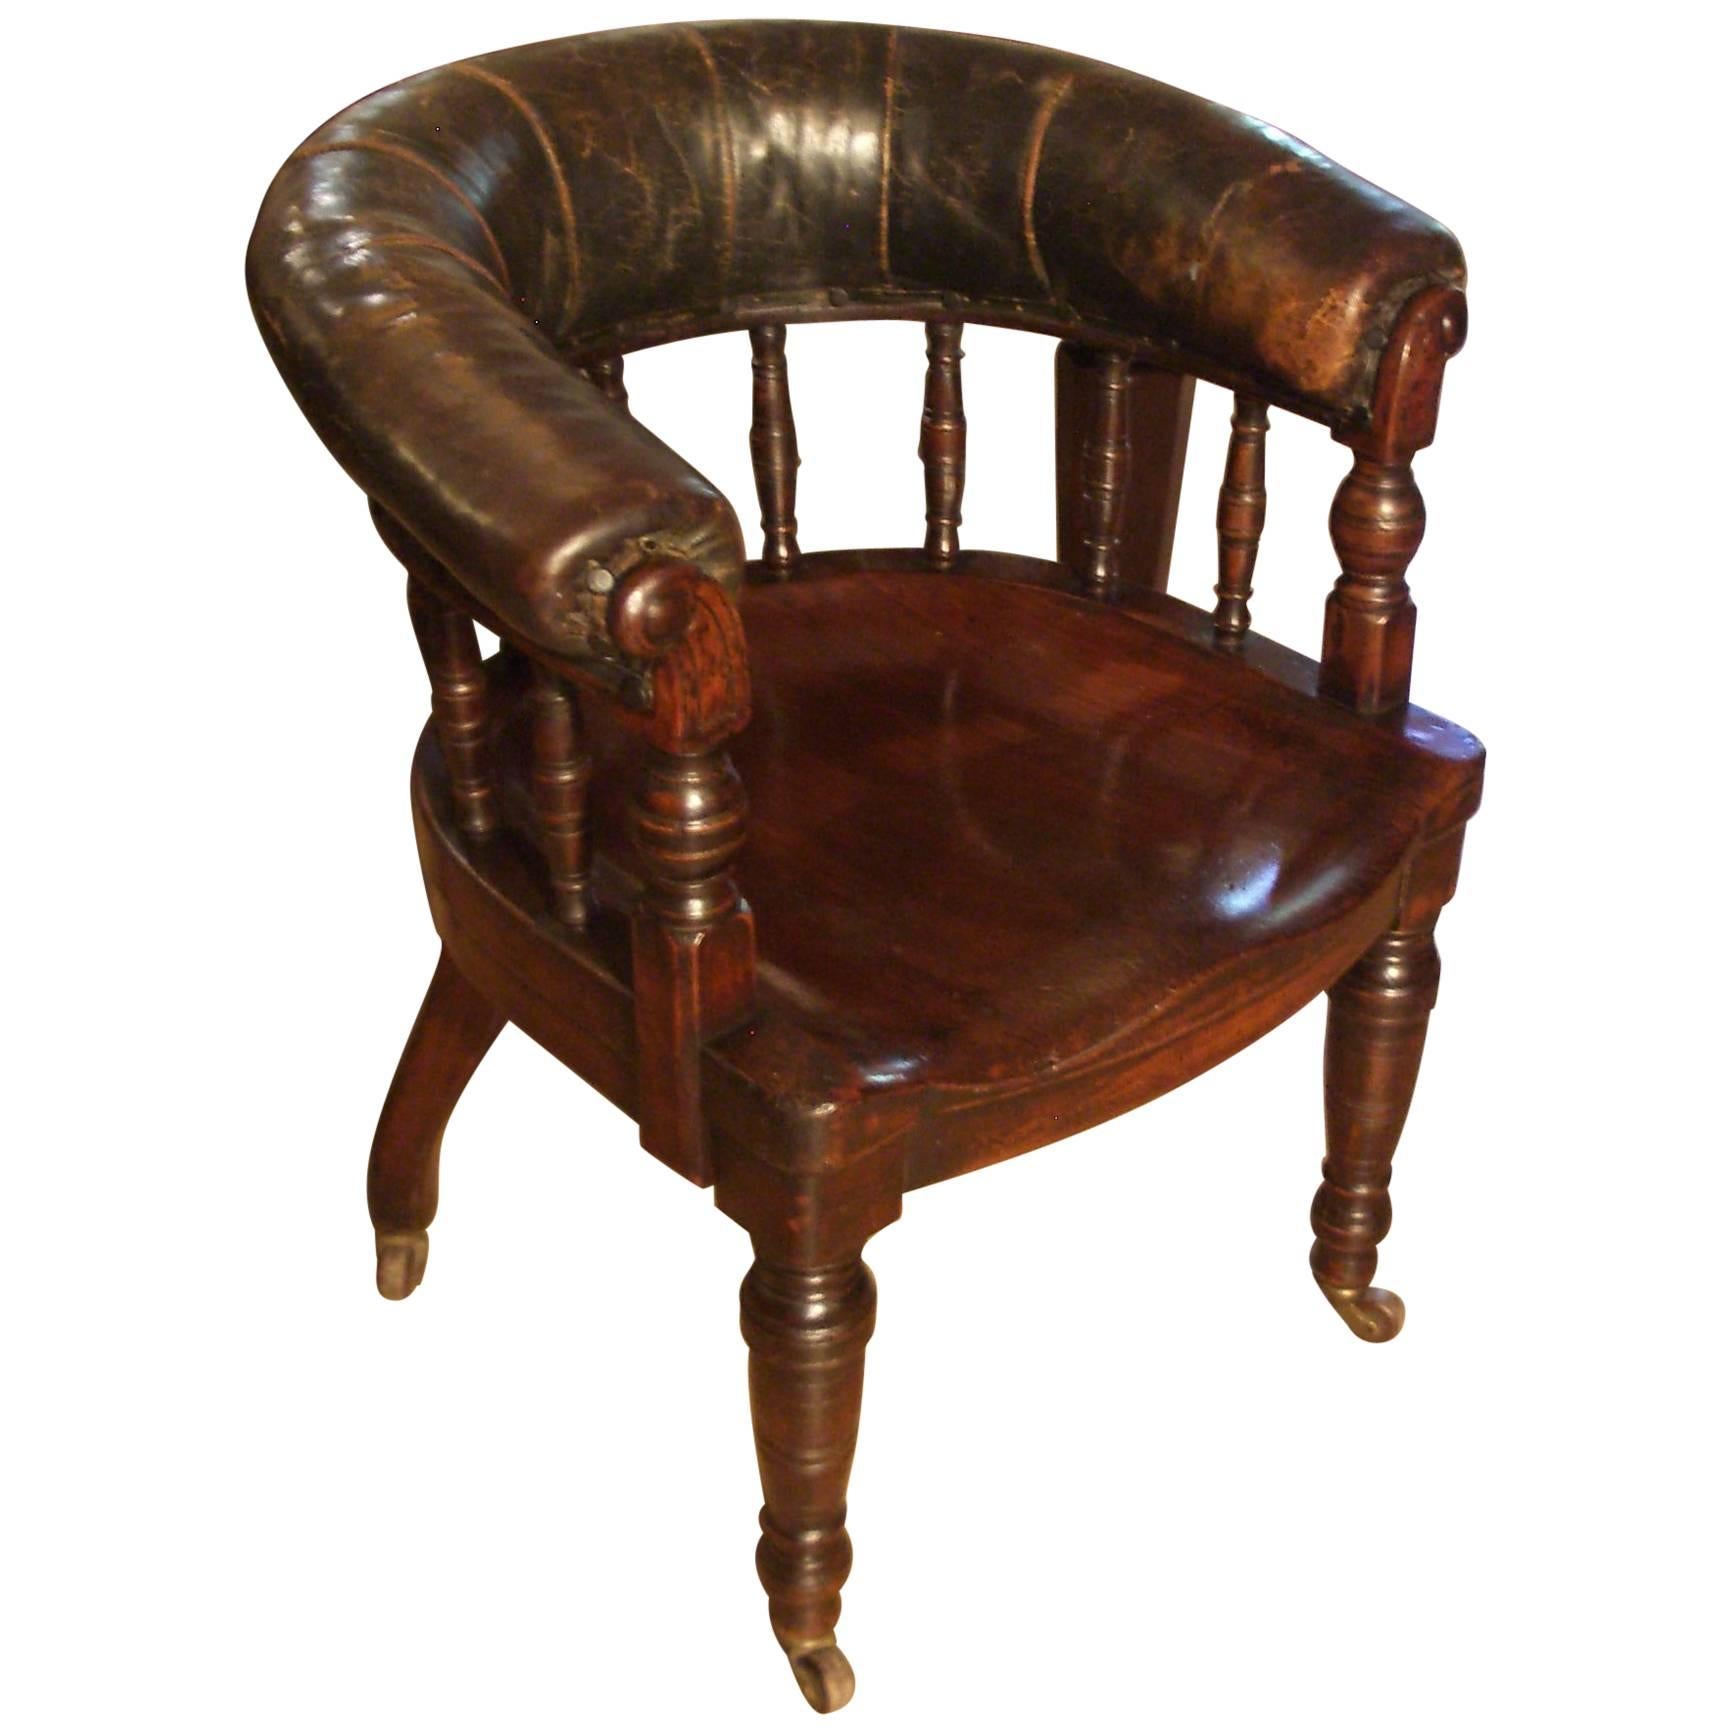 Beautiful Mahogany Desk Chair with Leather Upholstery